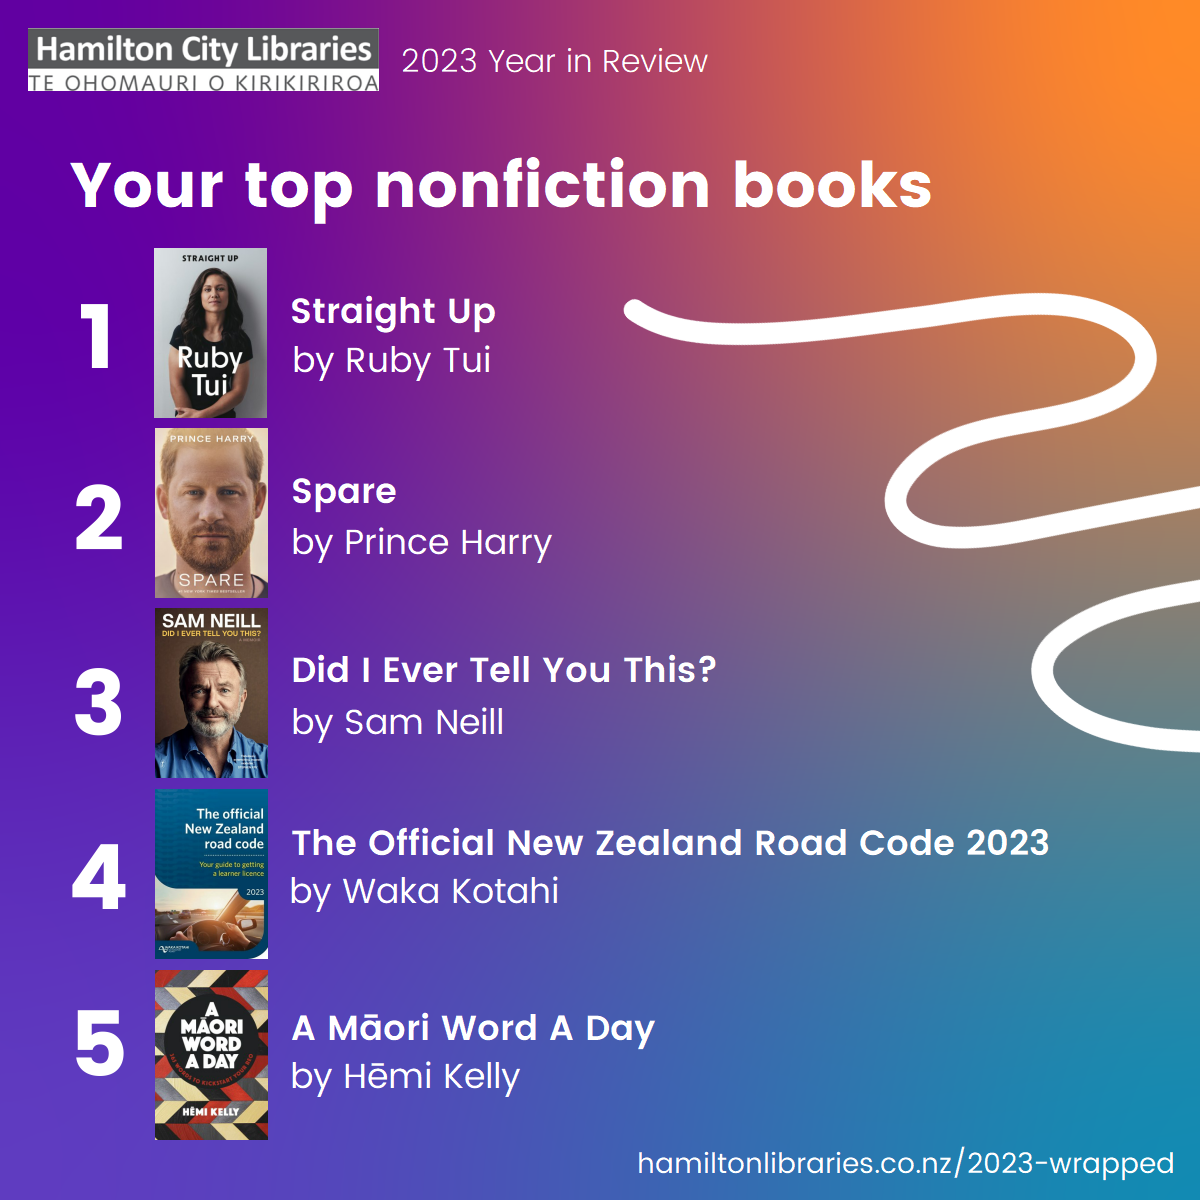 Top 5 Non-Fiction Books: Straight Up by Ruby Tui, Spare by Prince Harry, Did I Ever Tell You This? by Sam Neill, The Official NZ Road Code 2023, A Maori Word A Day by Hemi Kelly.